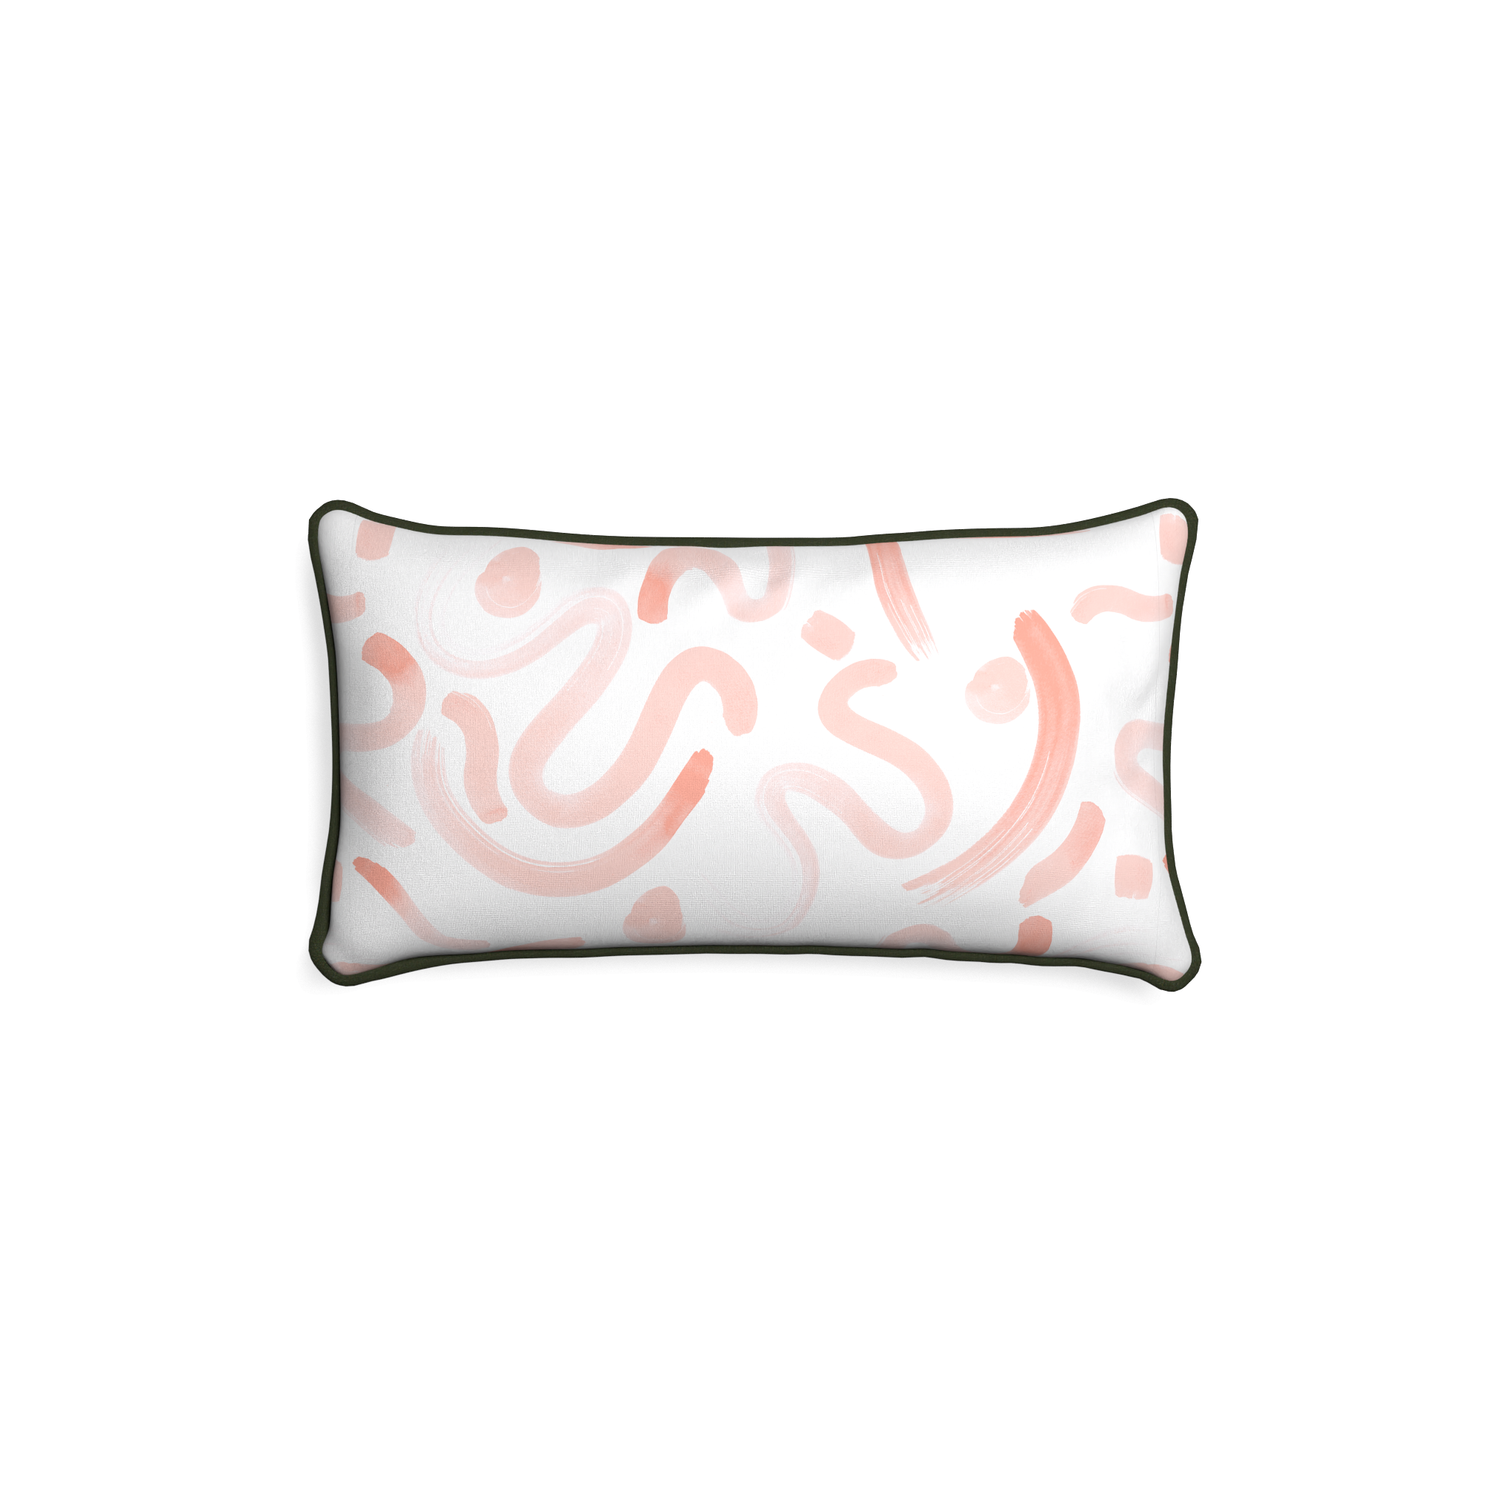 Petite-lumbar hockney pink custom pink graphicpillow with f piping on white background